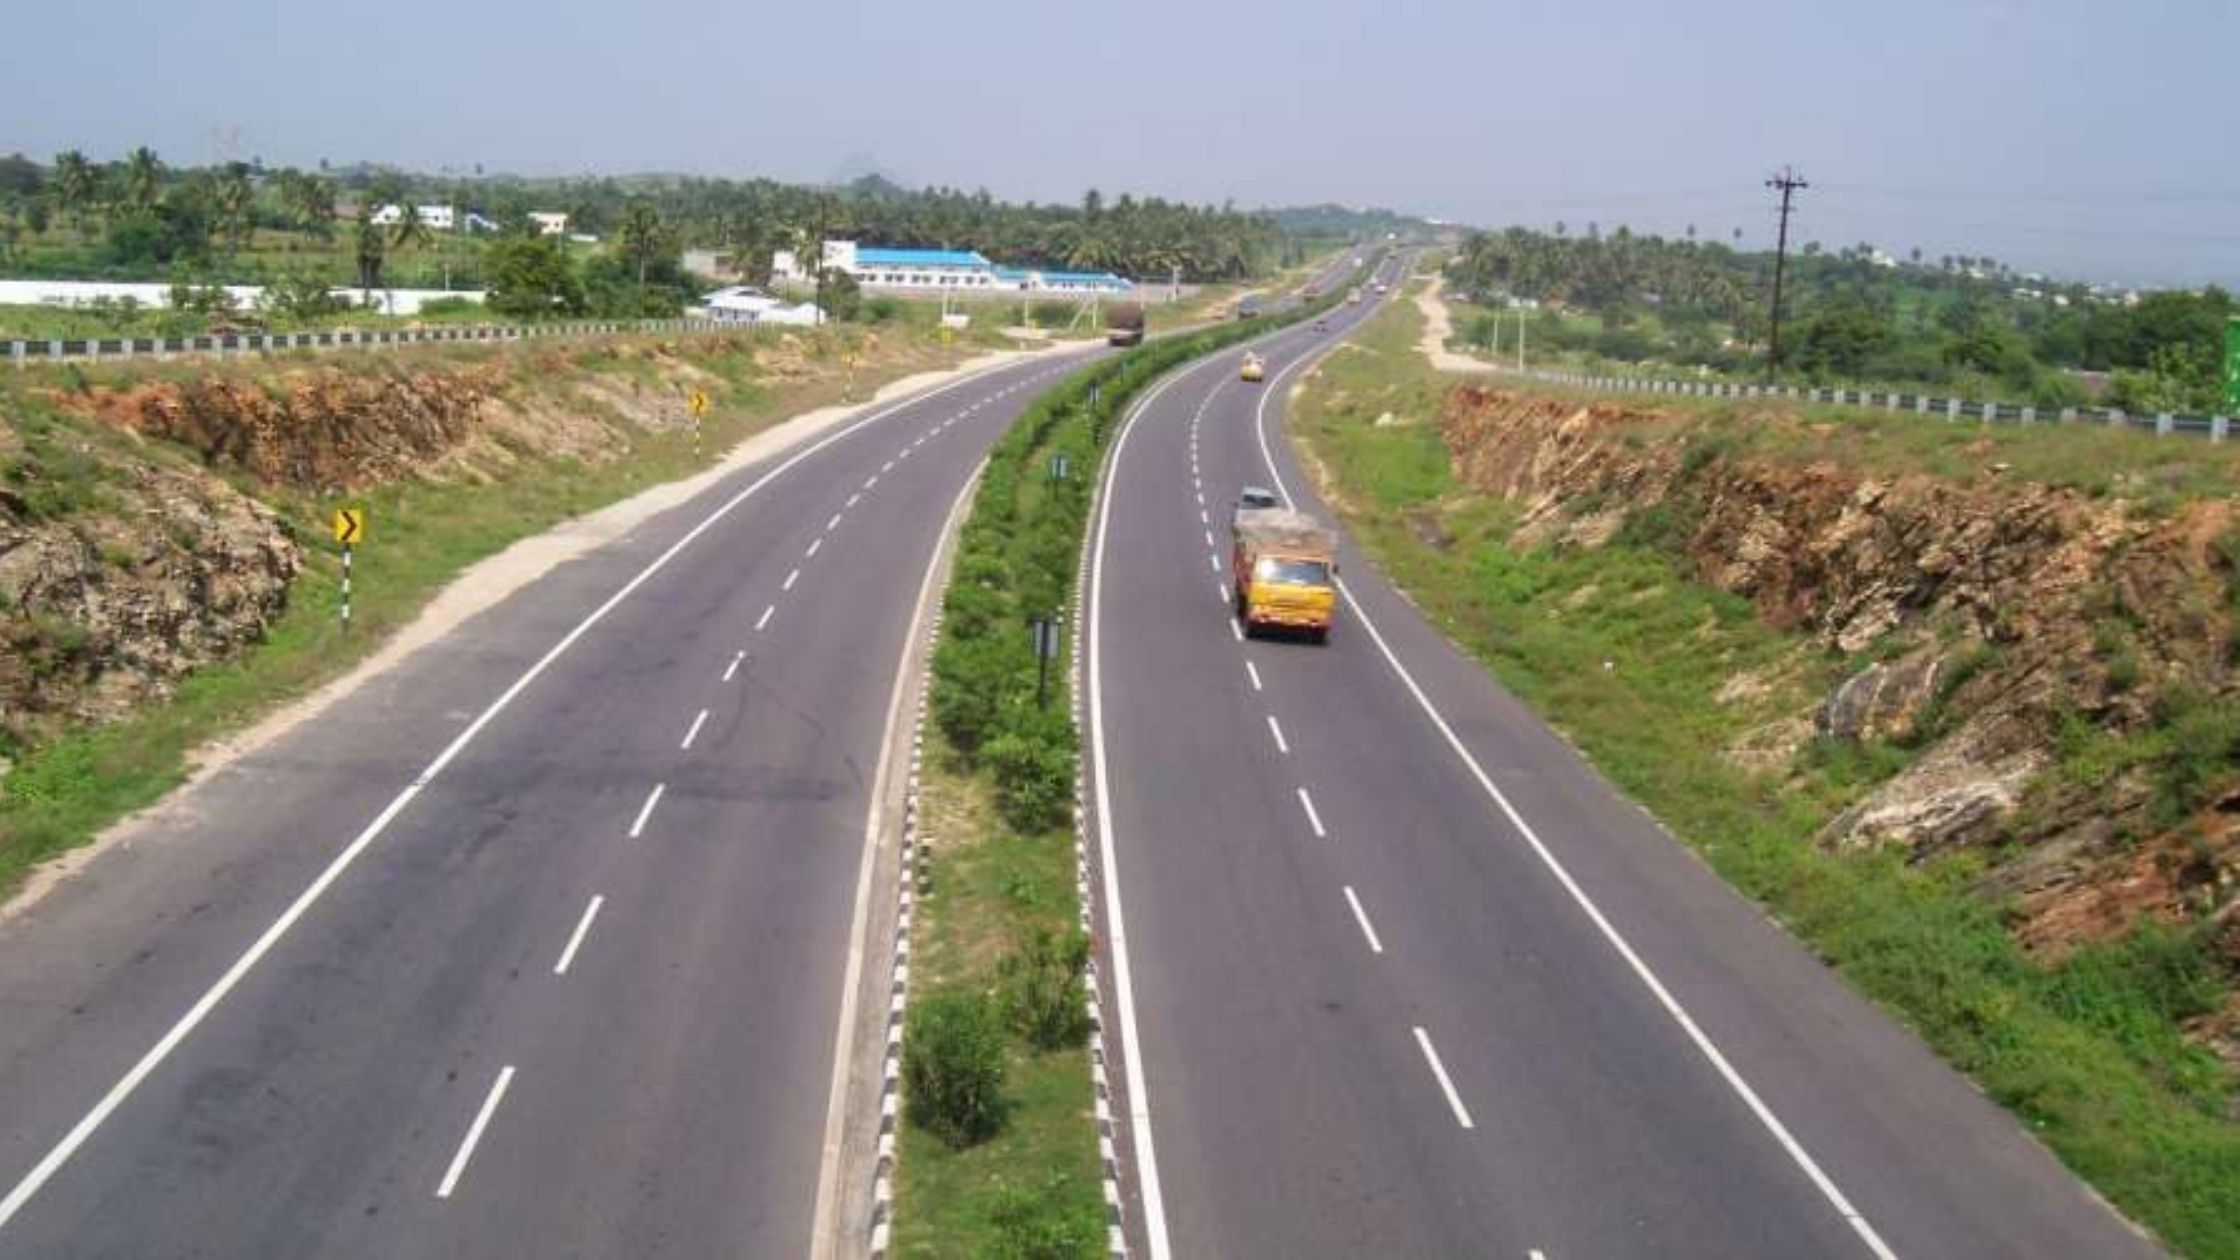 state highways will be converted into national highways